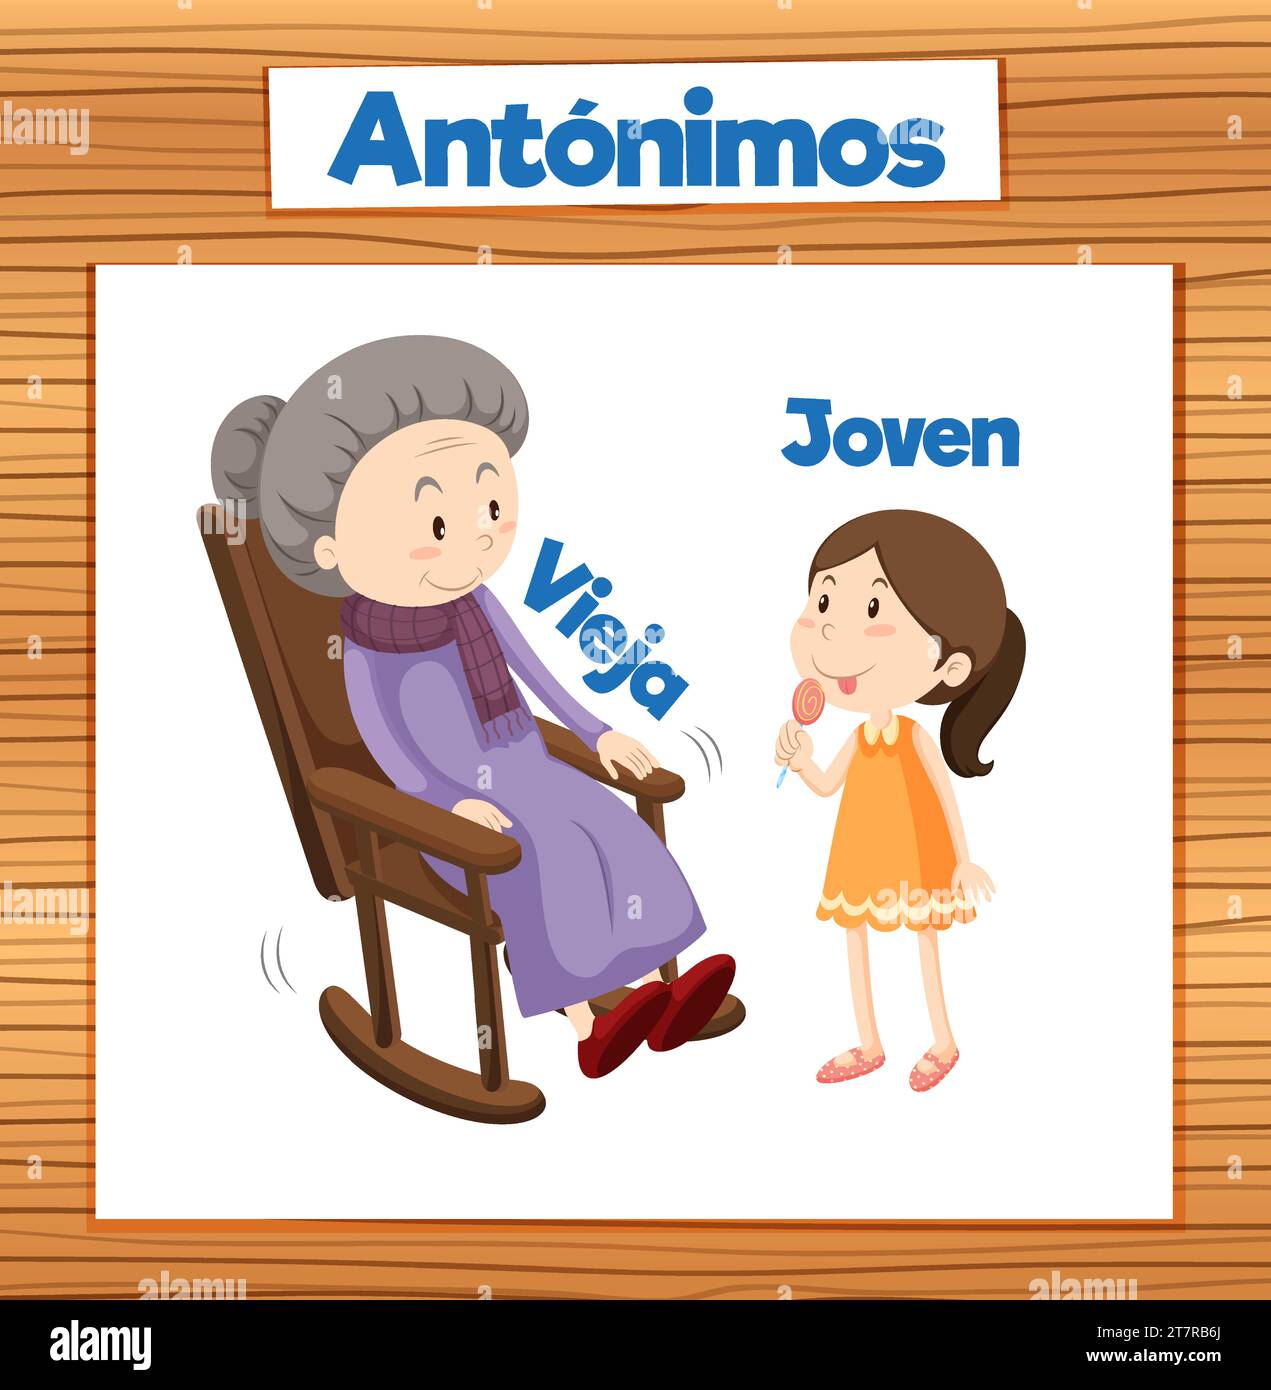 Colorful vector illustration of Spanish word card featuring antonyms Vieja and Joven means old and young Stock Vector